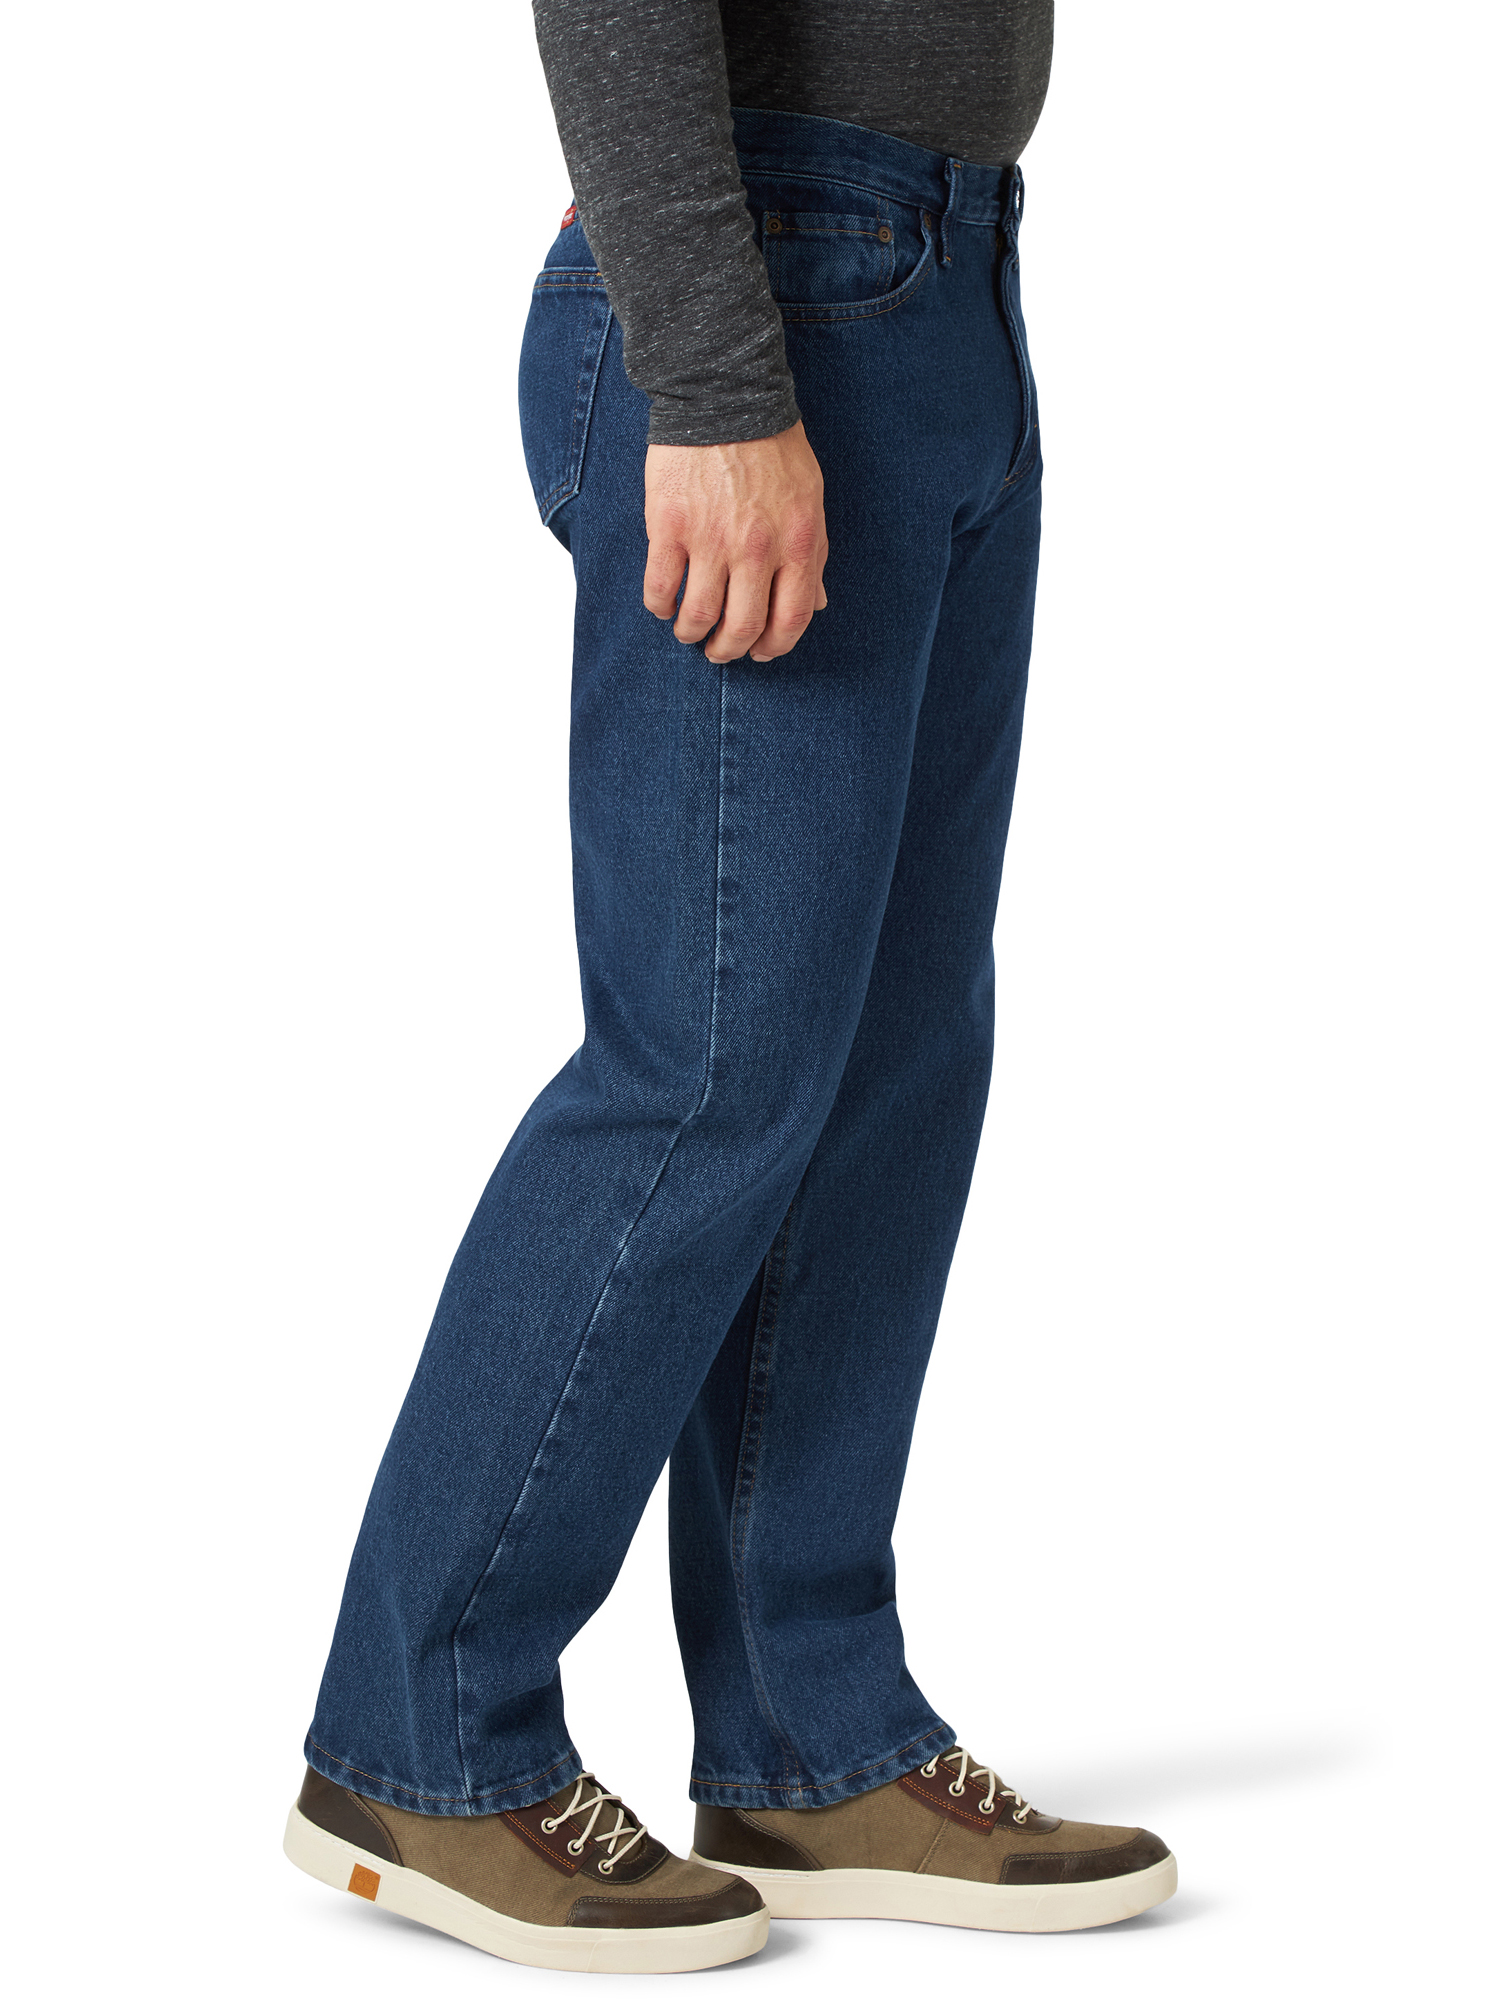 Wrangler Men's and Big Men's Relaxed Fit Jeans - image 4 of 4